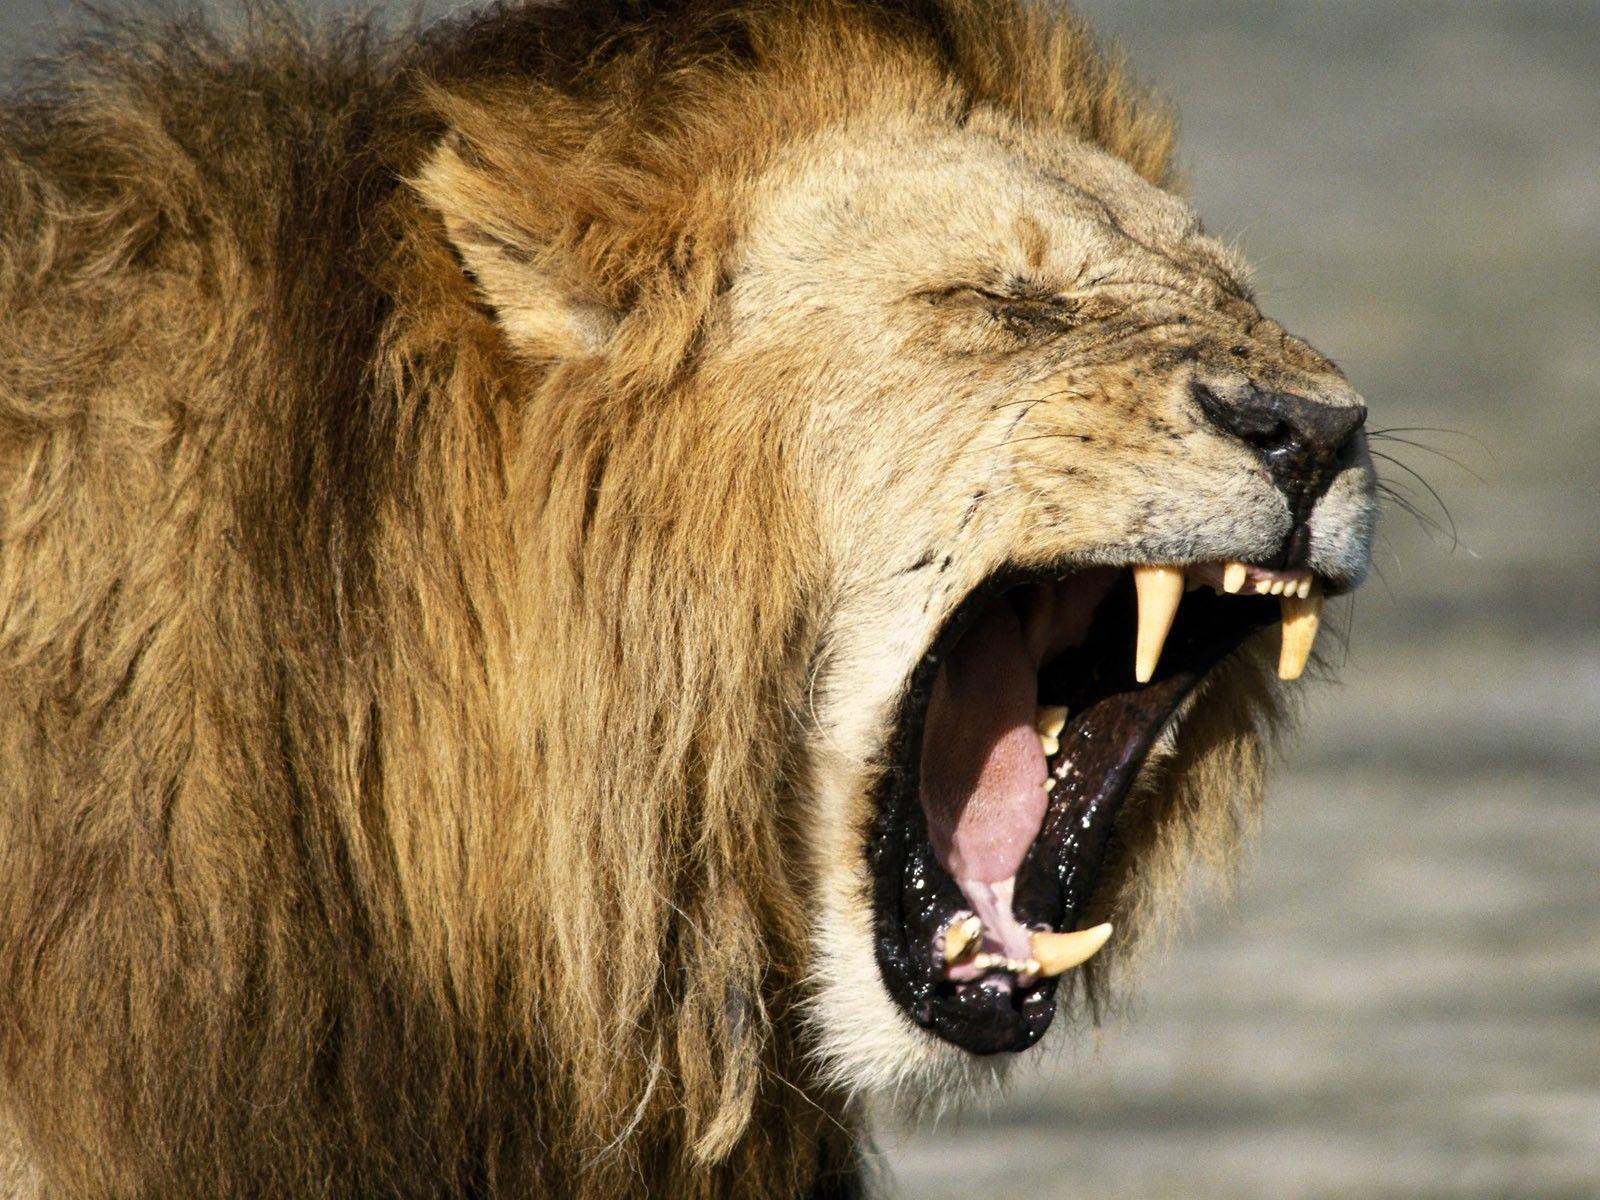 Best And Best Image Of Roaring Lion Roaring Lion. Lions